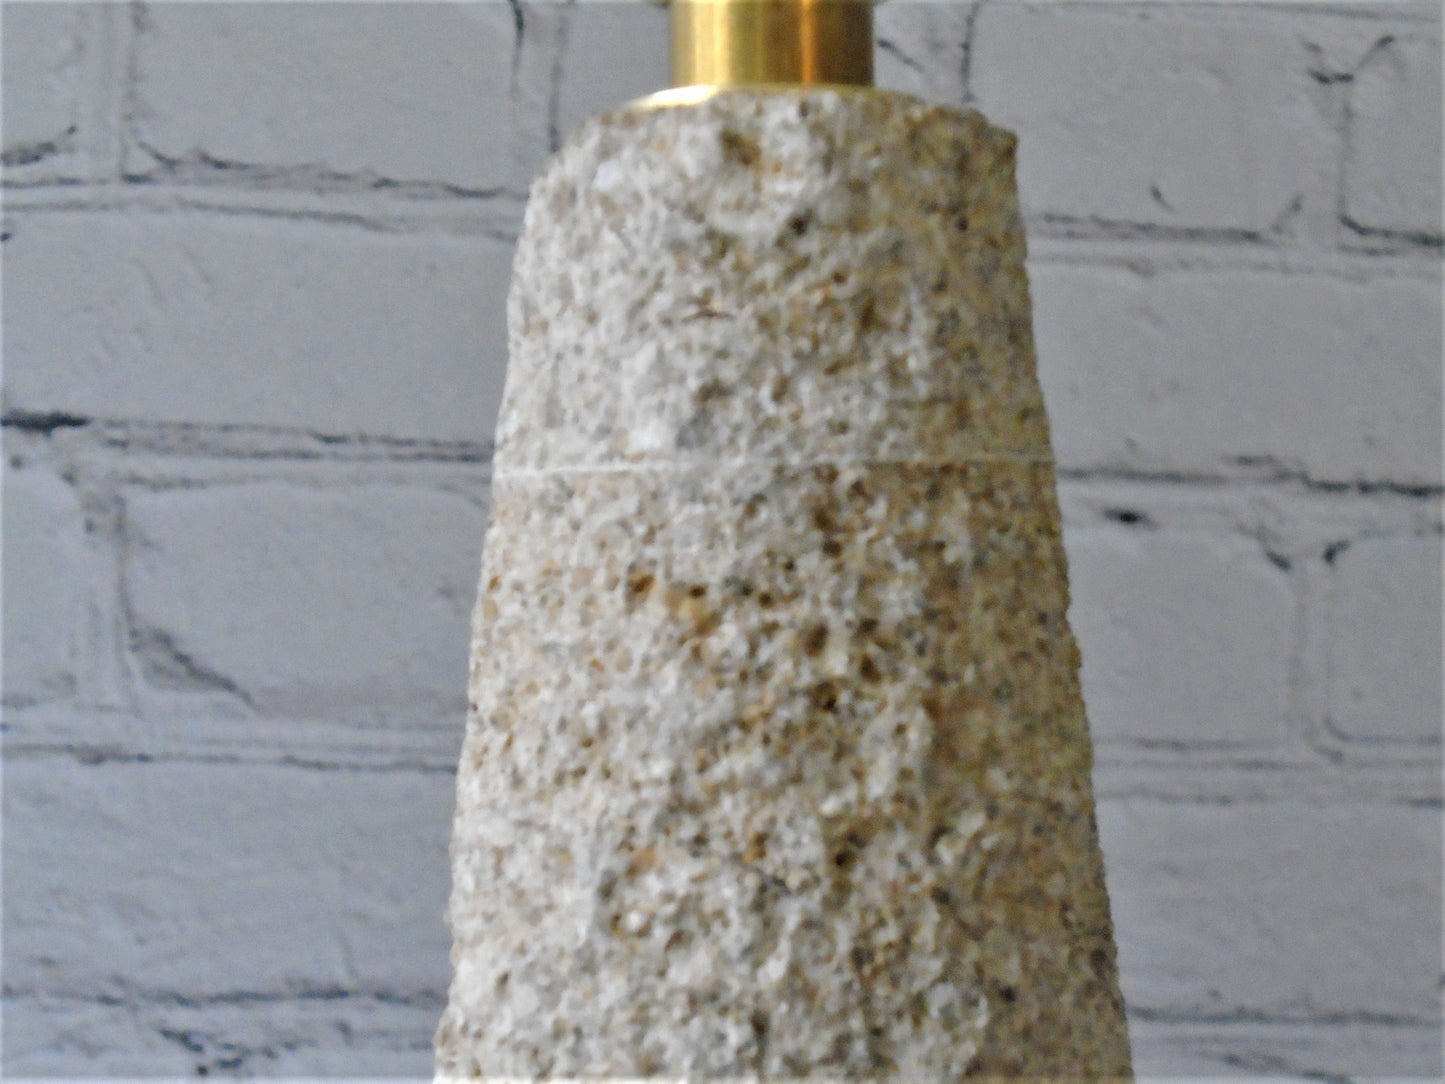 Conical Stone Lamp Base with a Rustic Textured Finish